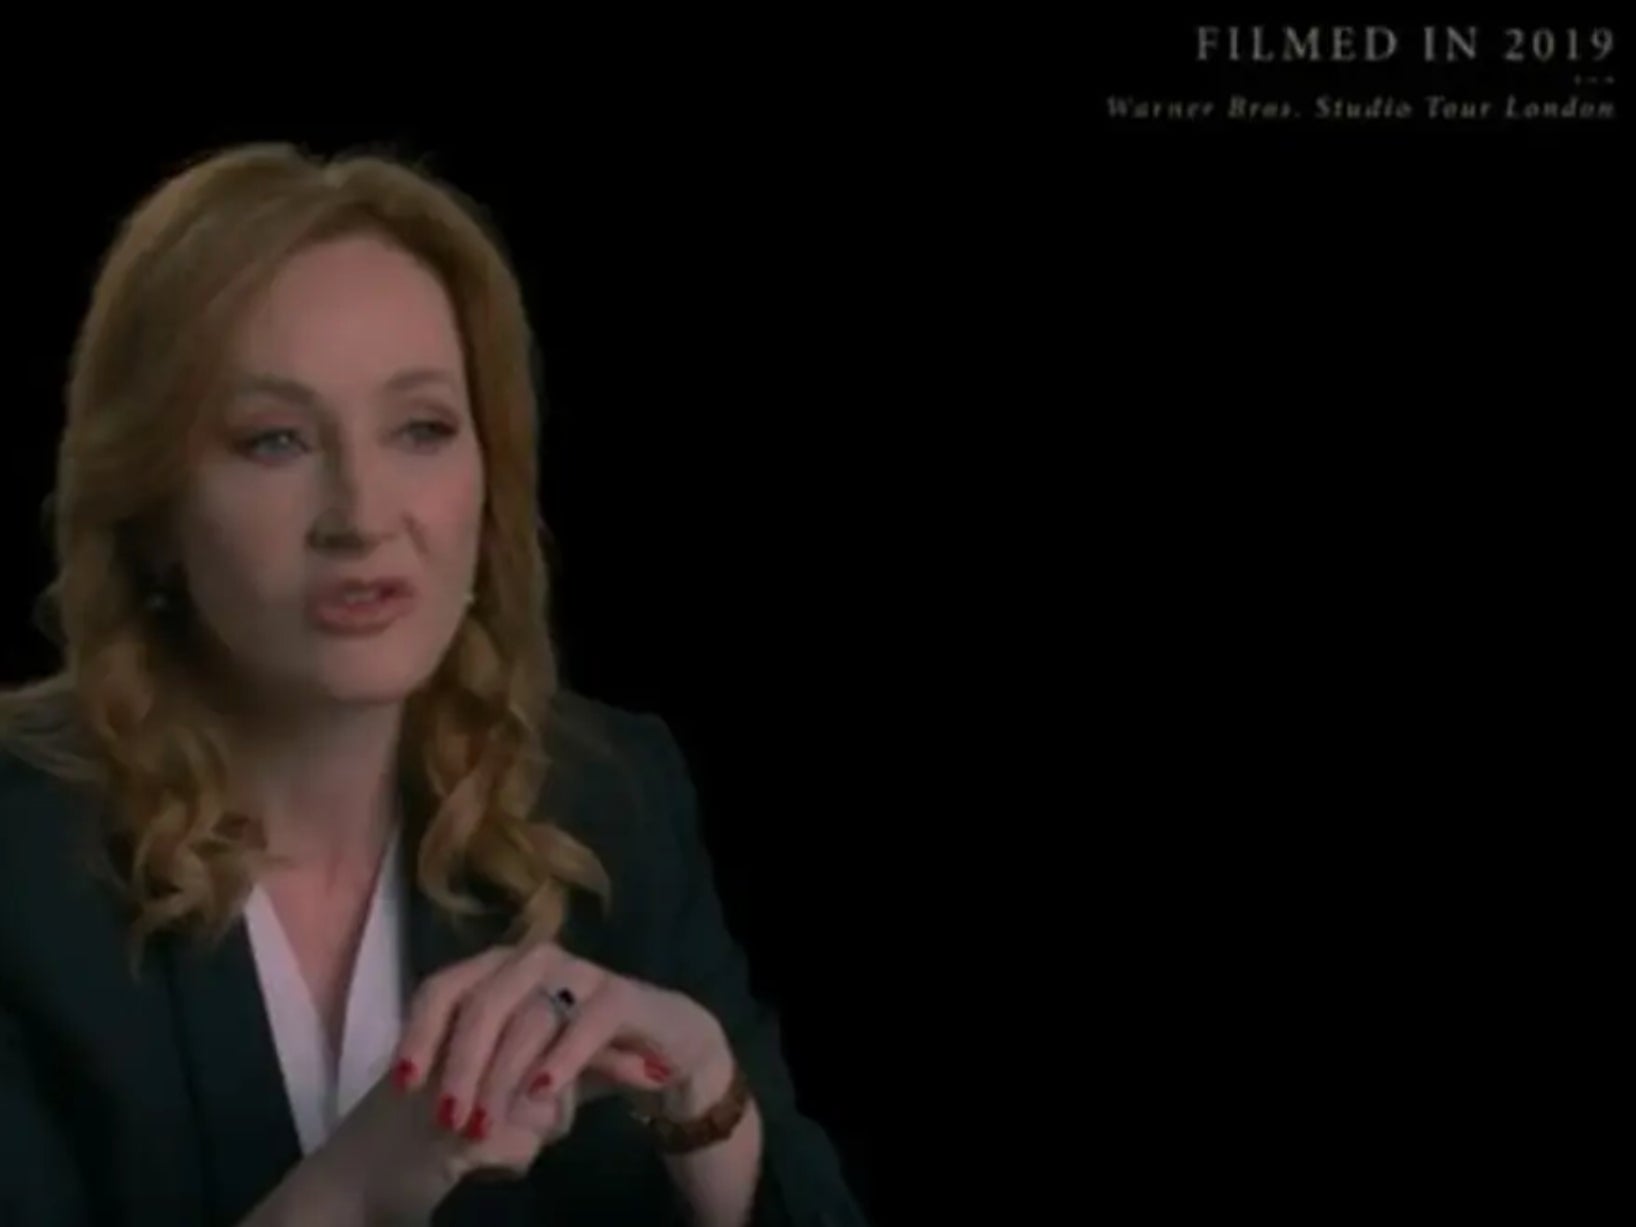 Archive footage of JK Rowling was used in ‘Return to Hogwarts’